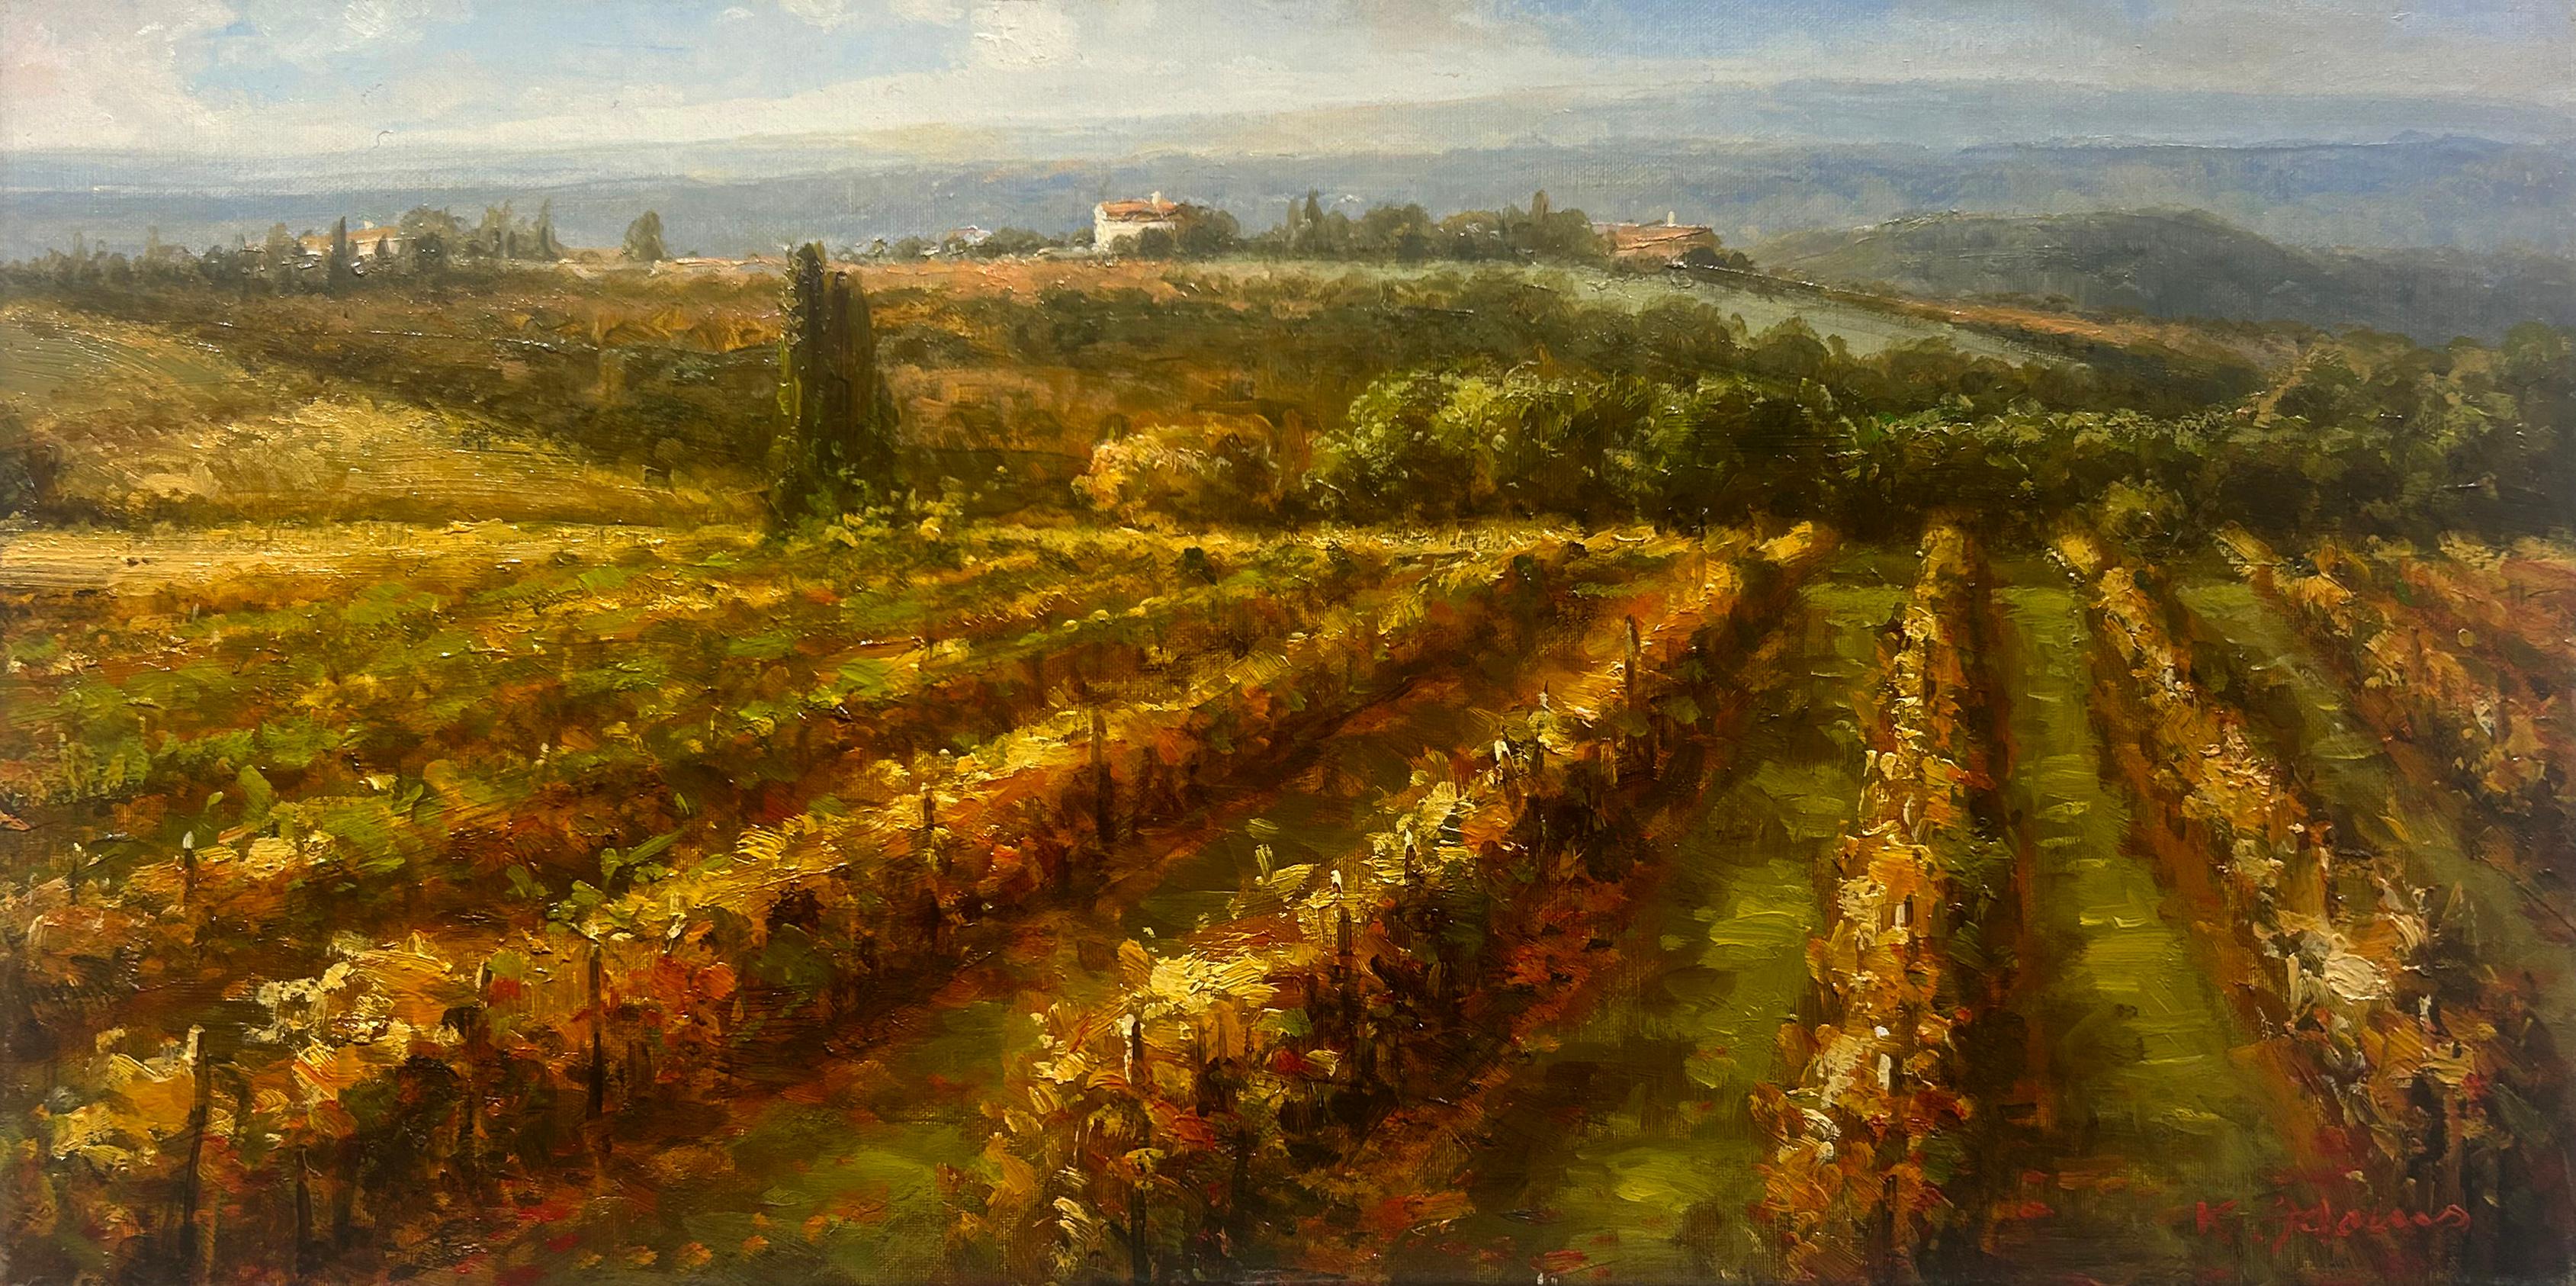 Ronald Adams, "Summer Evening", 12x24 Tuscan Landscape Oil Painting on Canvas